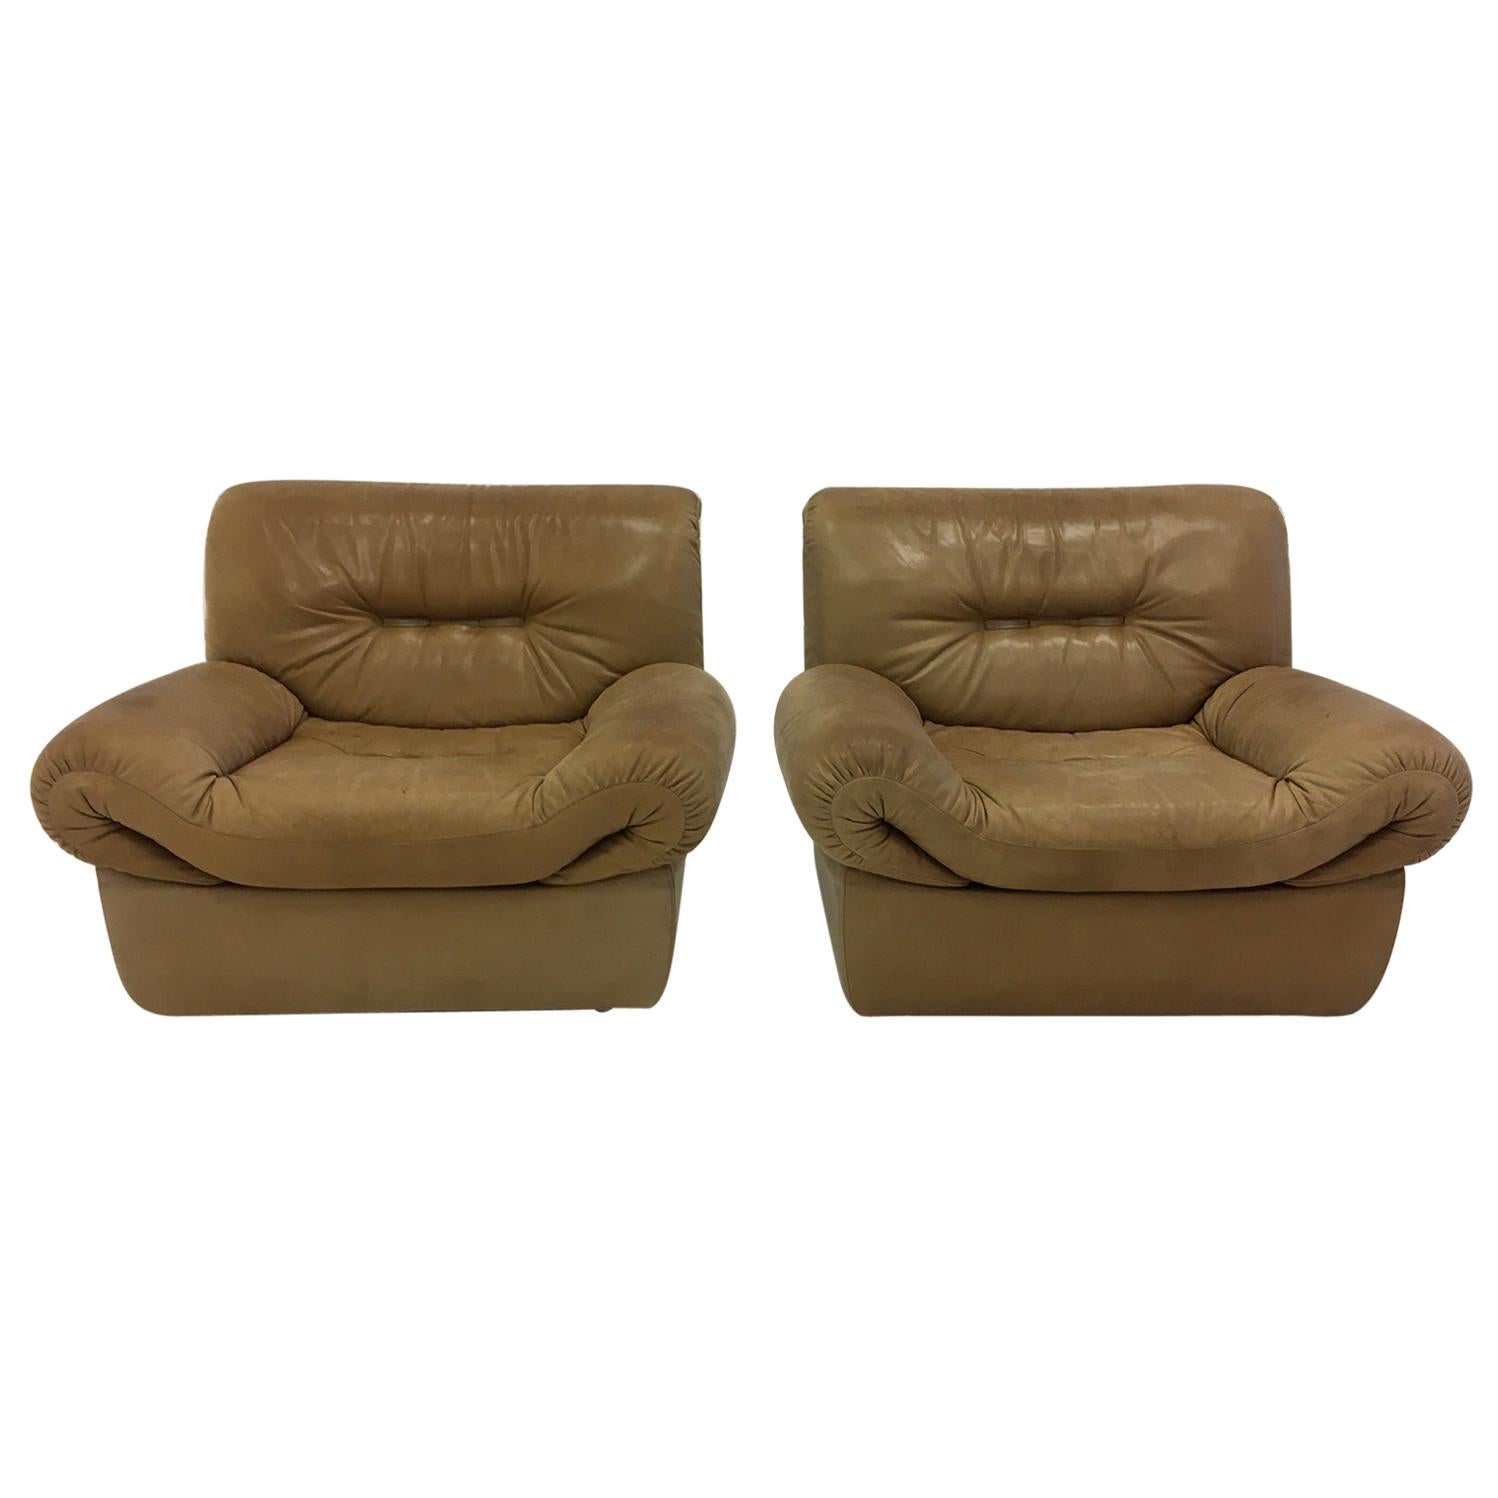 Wittmann, Model 'Chairman' Pair of Lounge Chairs, Patinated Cognac Leather, 1971 For Sale